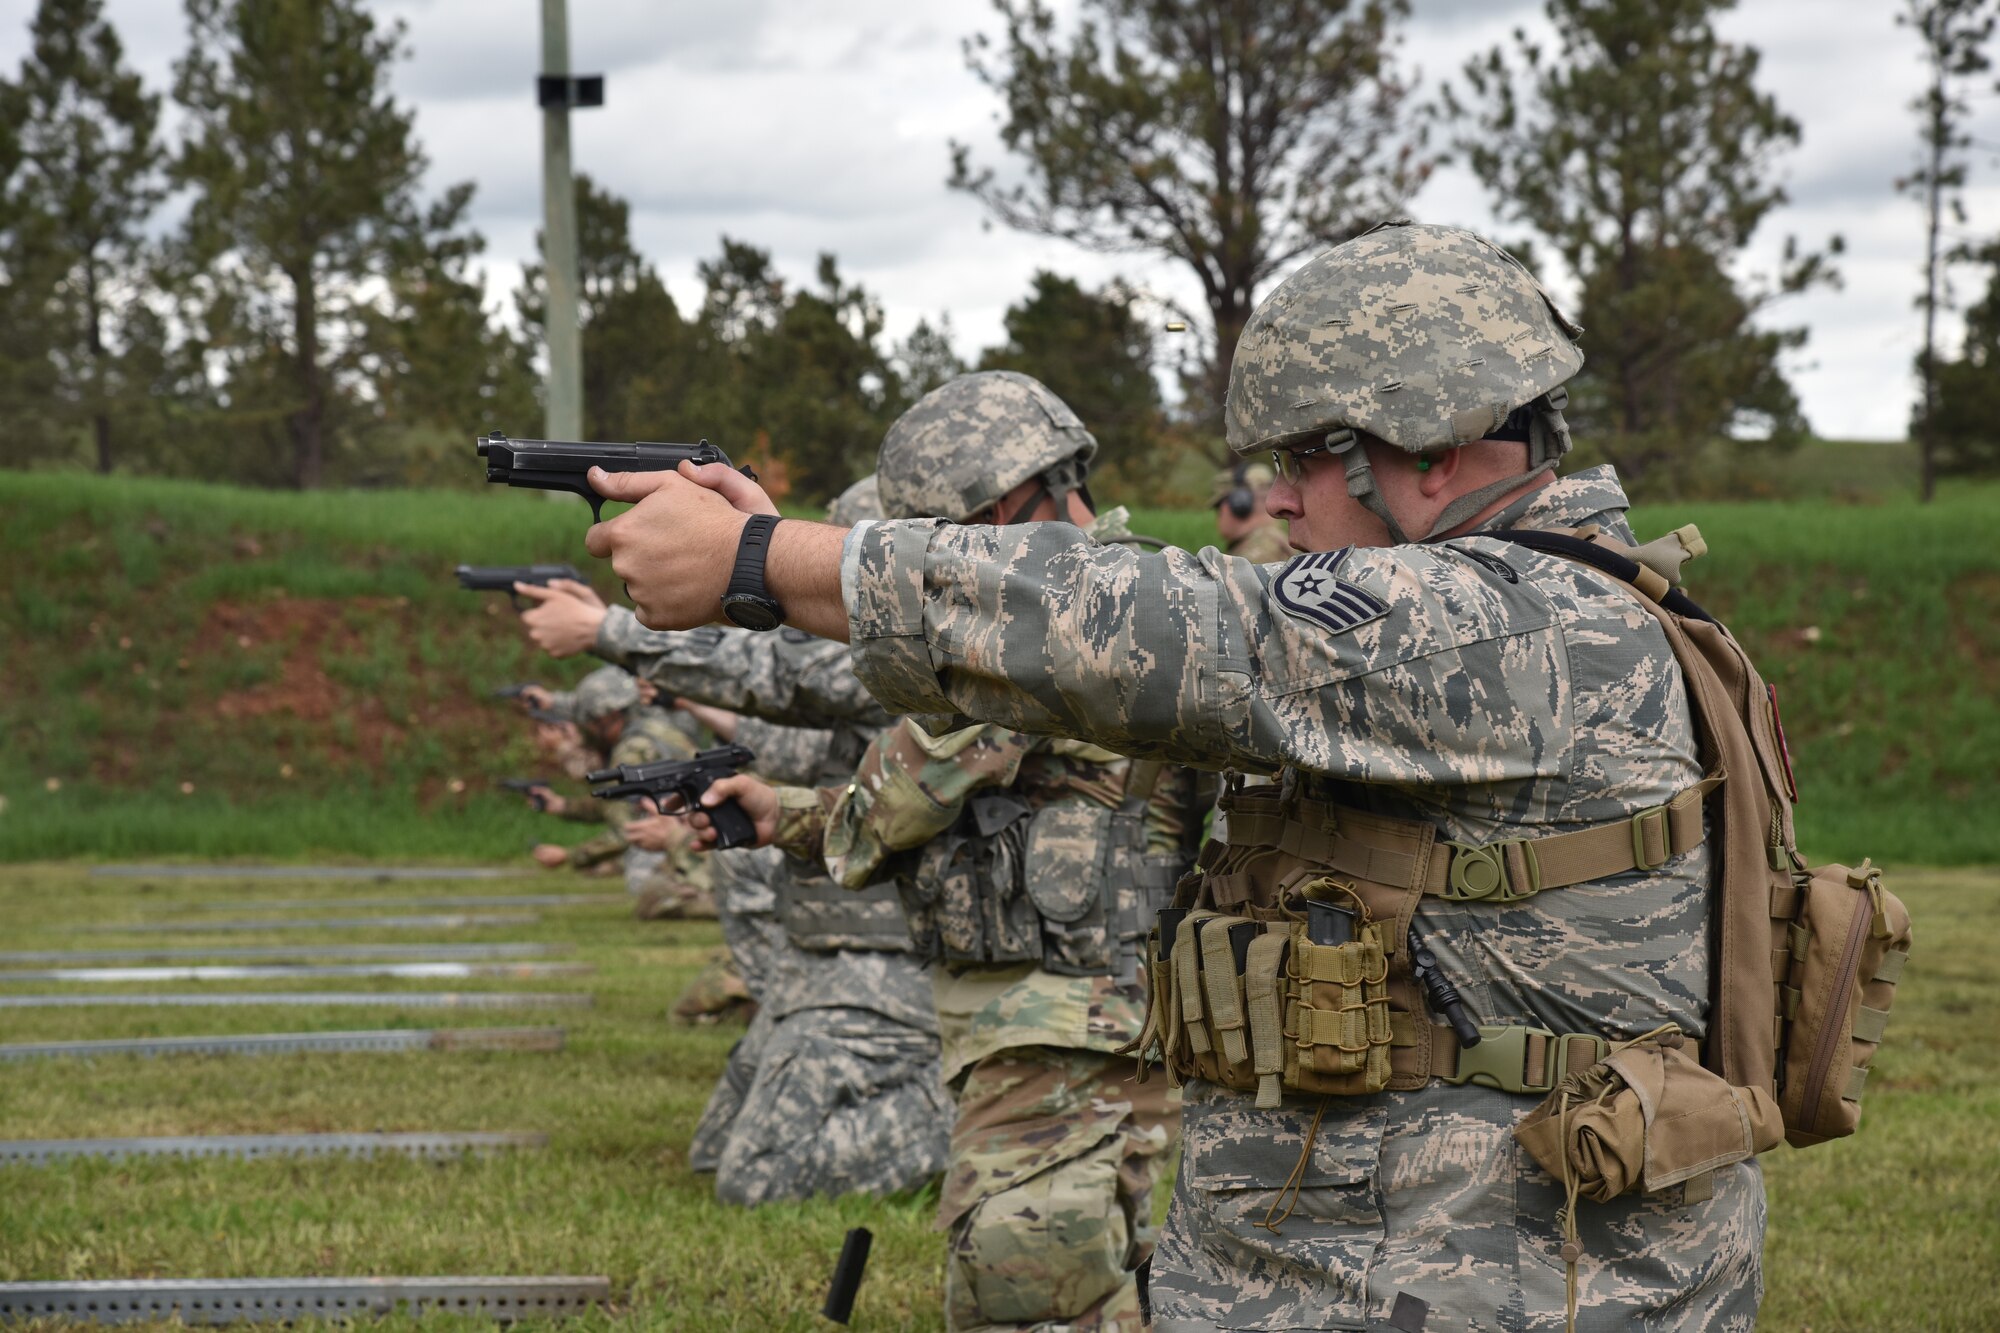 Staff Sgt. Adam Witte, 114th Maintenance Squadron electronic countermeasures technician, participates in The State Command Sergeant Major’s Outdoor Match May 18, 2018 at Camp Rapid, S.D.